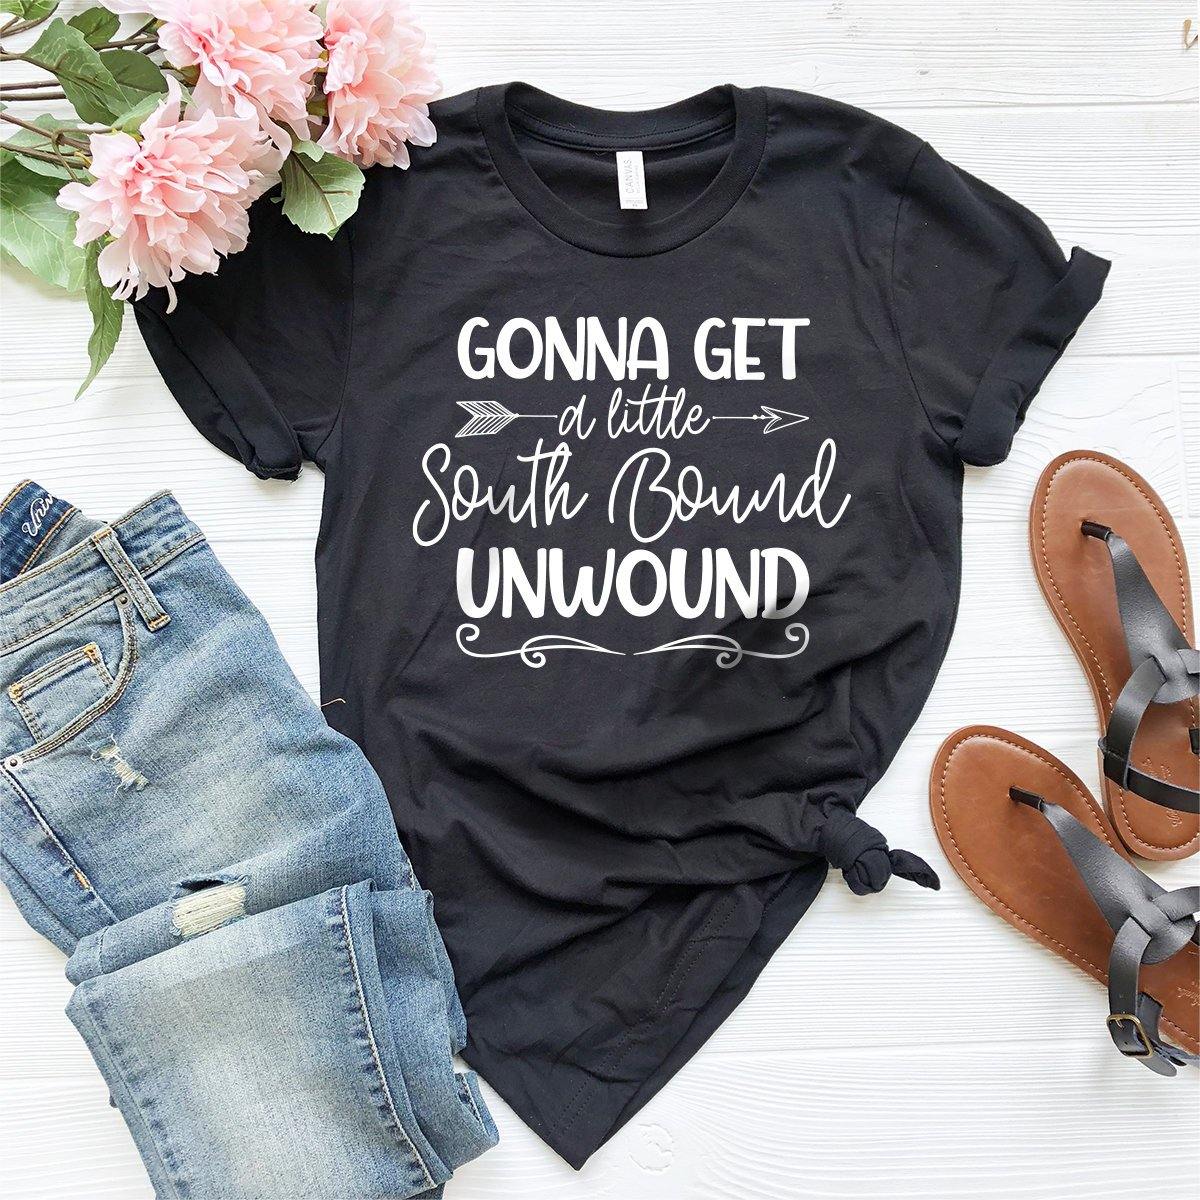 Country Girl Shirt, Western Girl Shirt, Cowgirl Shirt, Southern Girl Shirt, Gonna Get A Little South Bound Unwound Shirt, Southern Tee - Fastdeliverytees.com